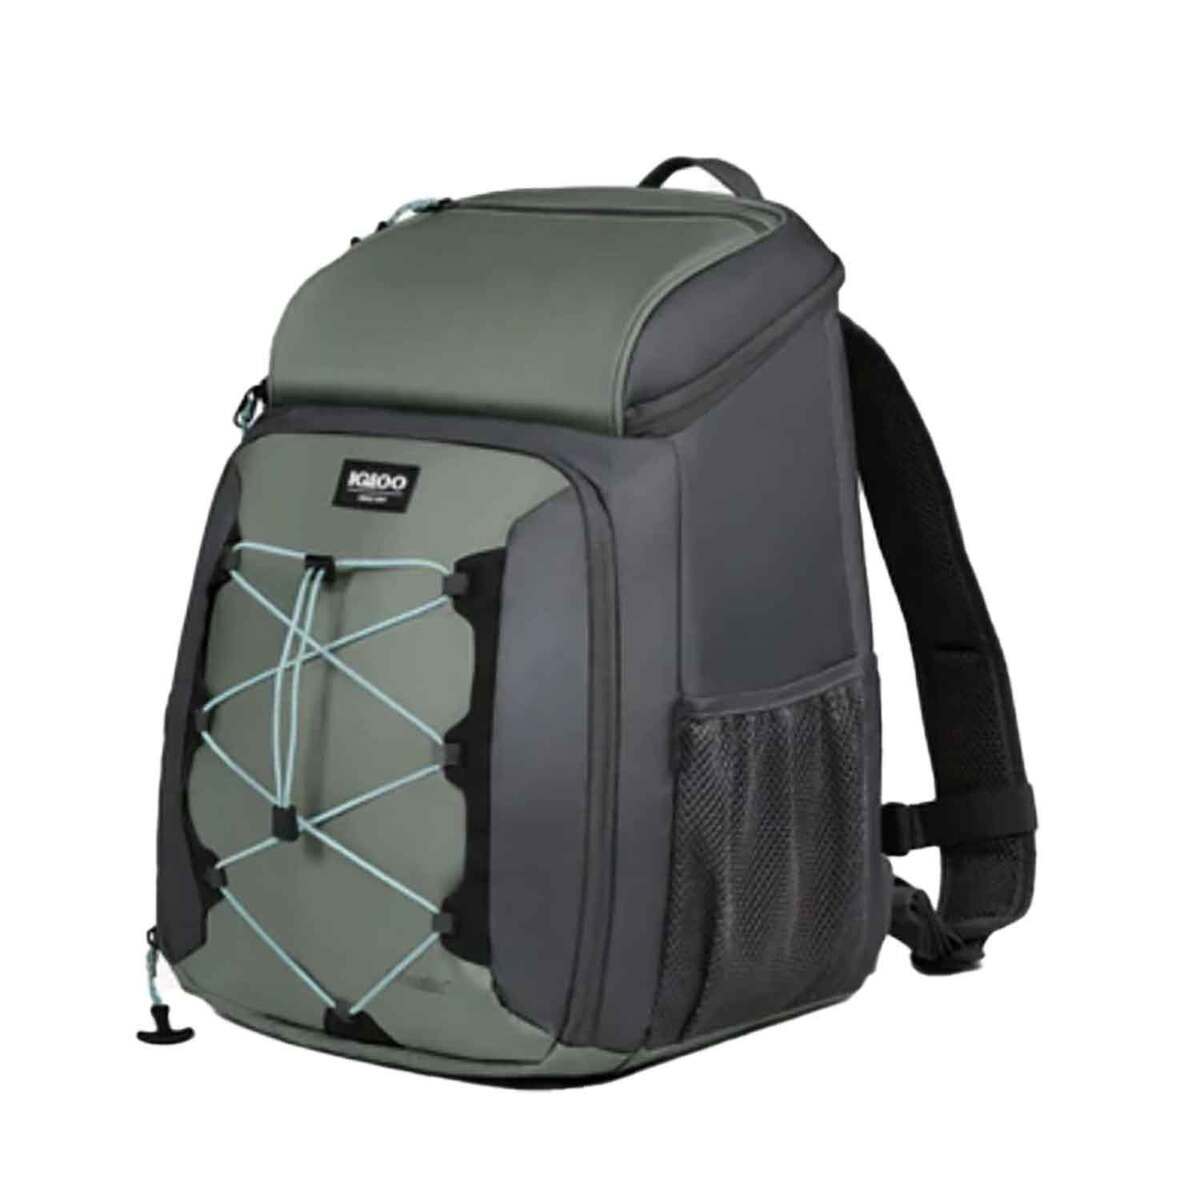 Igloo Small Insulated Sport Backpack Cooler Bag (Holds 18 Cans)